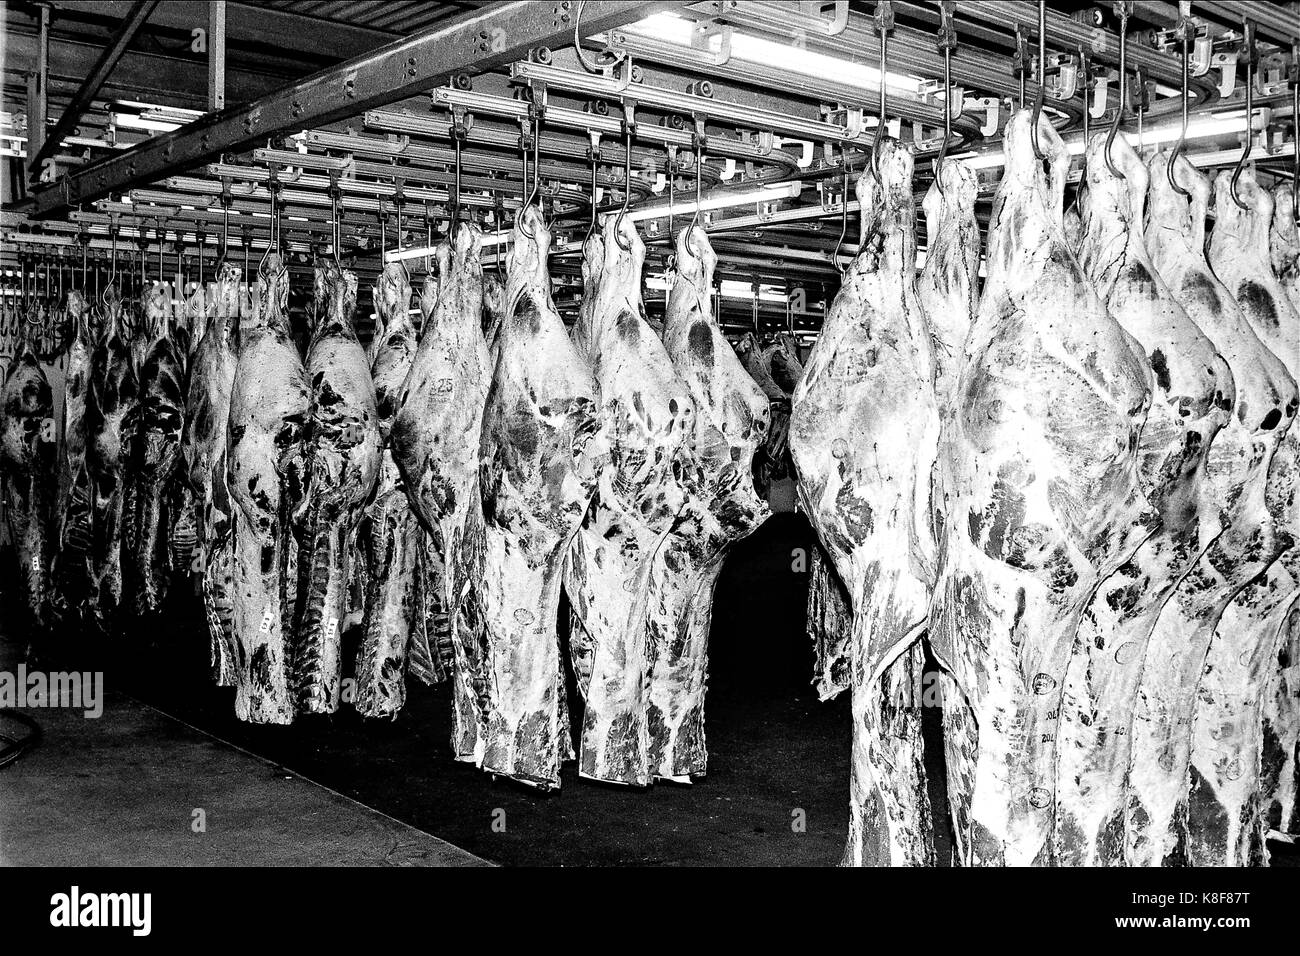 Slaughterhouse Black and White Stock Photos & Images - Alamy